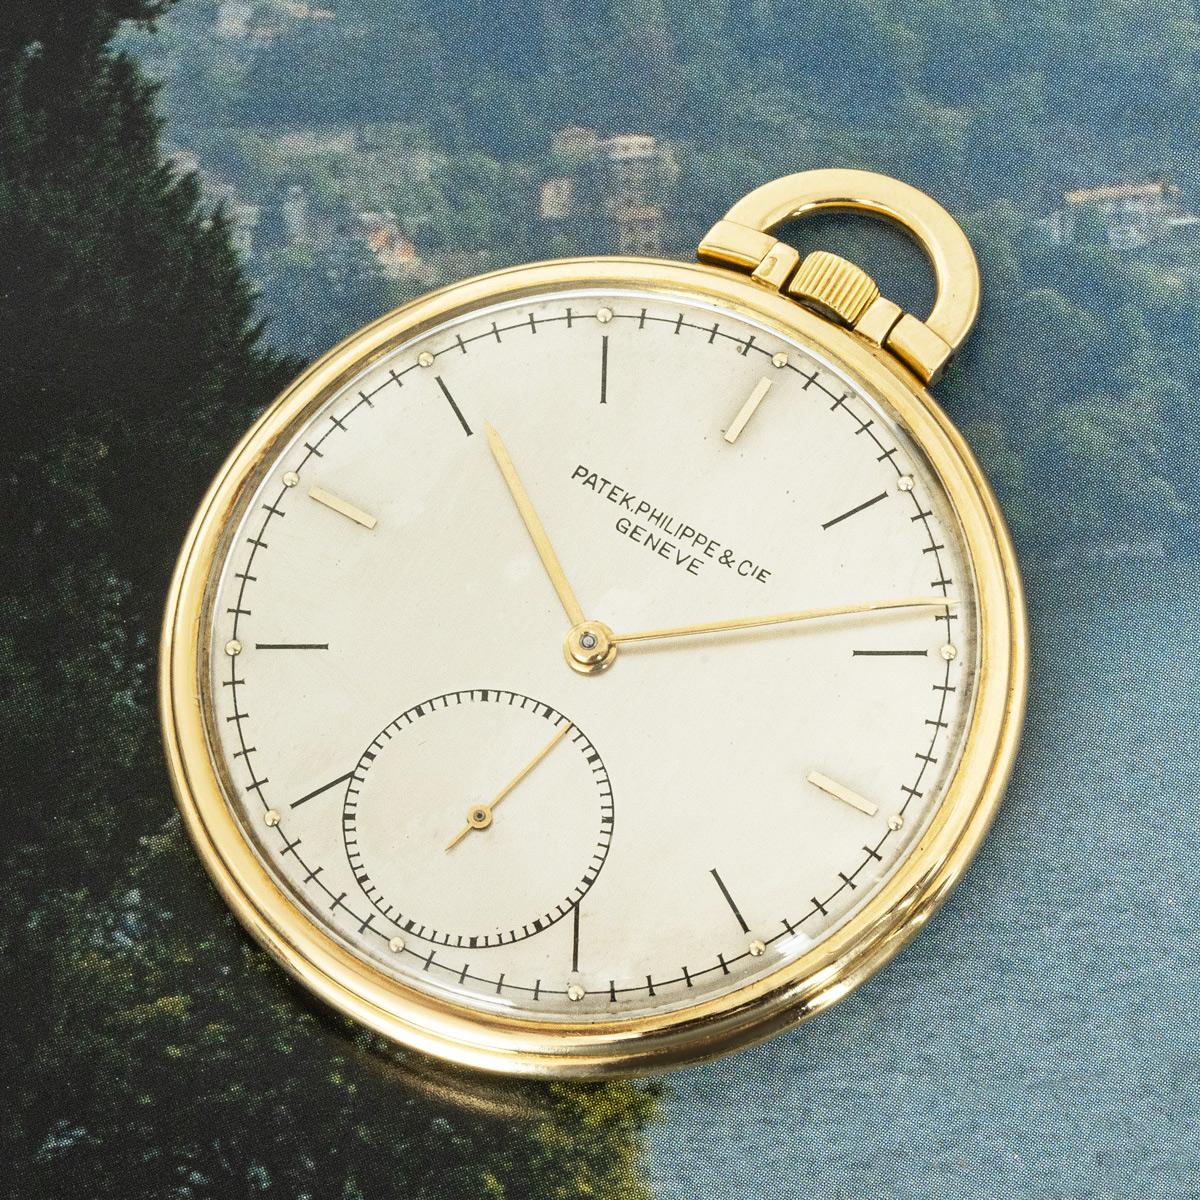 Patek Philippe. An 18ct Yellow Gold Slim Keyless Lever Open Face Pocket Watch C1944

Dial: The Silver dial fully signed Patek Philippe & Cie Geneve with batons, outer minute track and subsidiary seconds dial at six o'clock. The original slim elegant